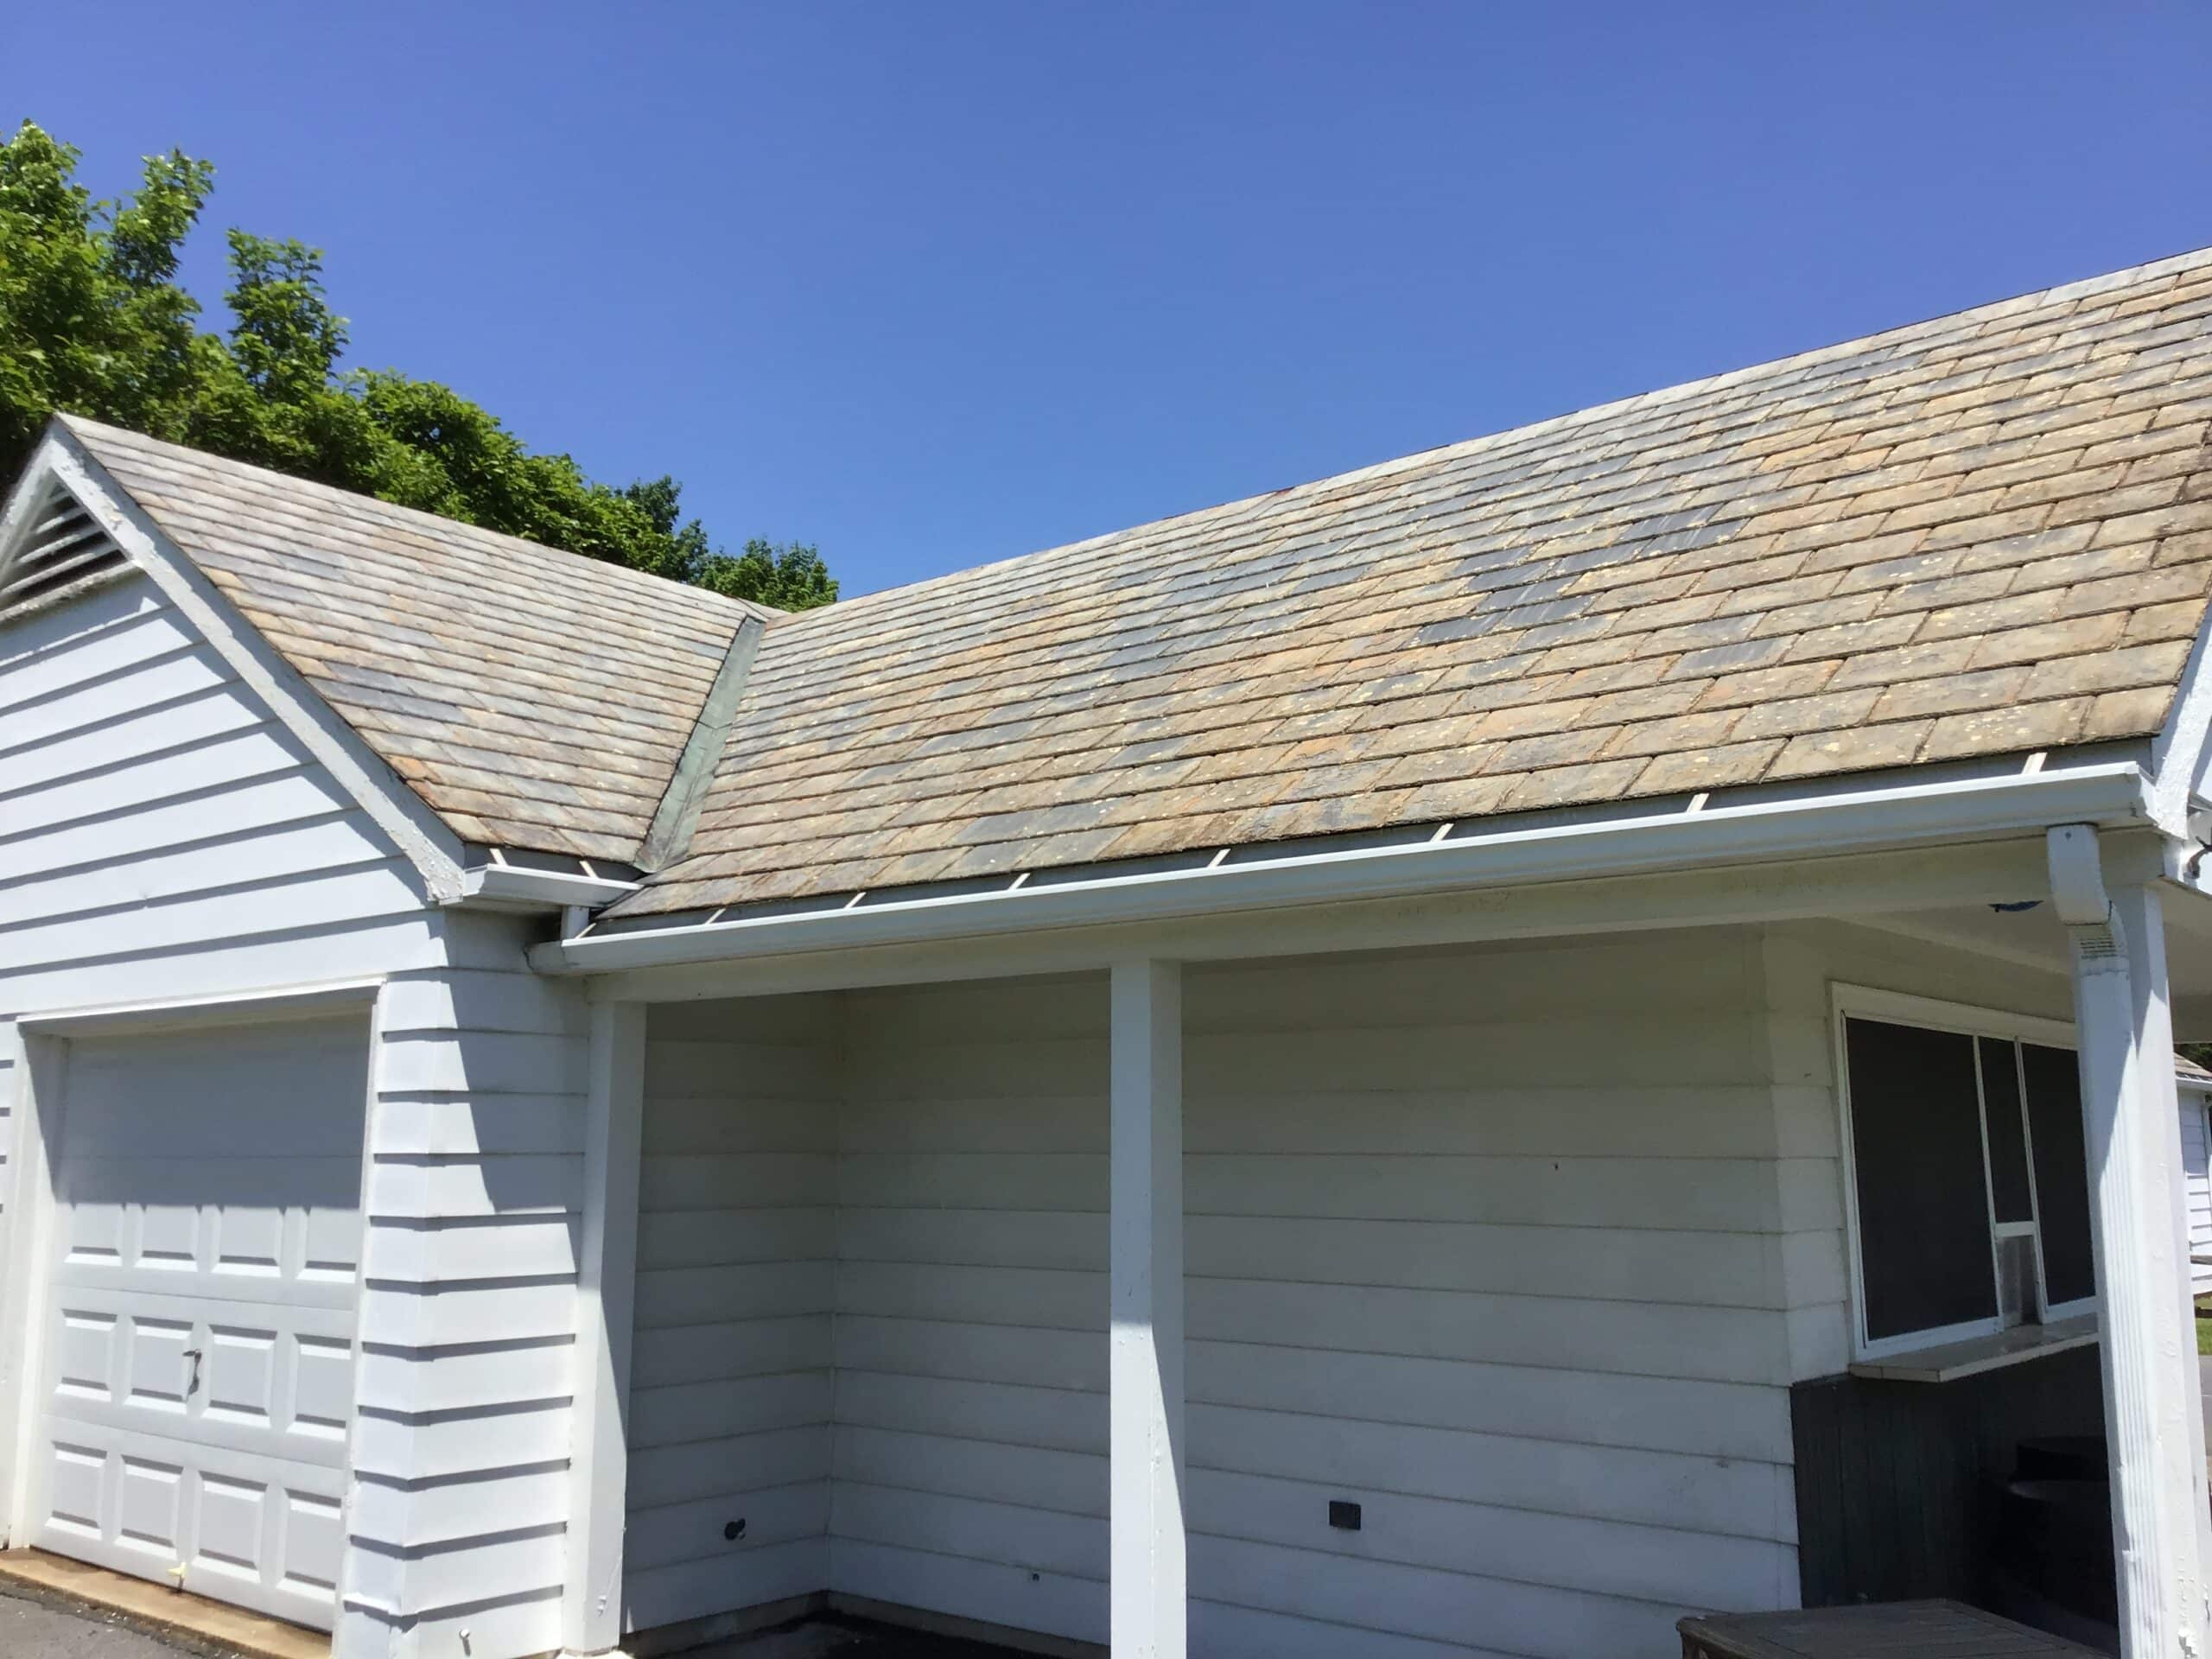 Roof After Power Washing